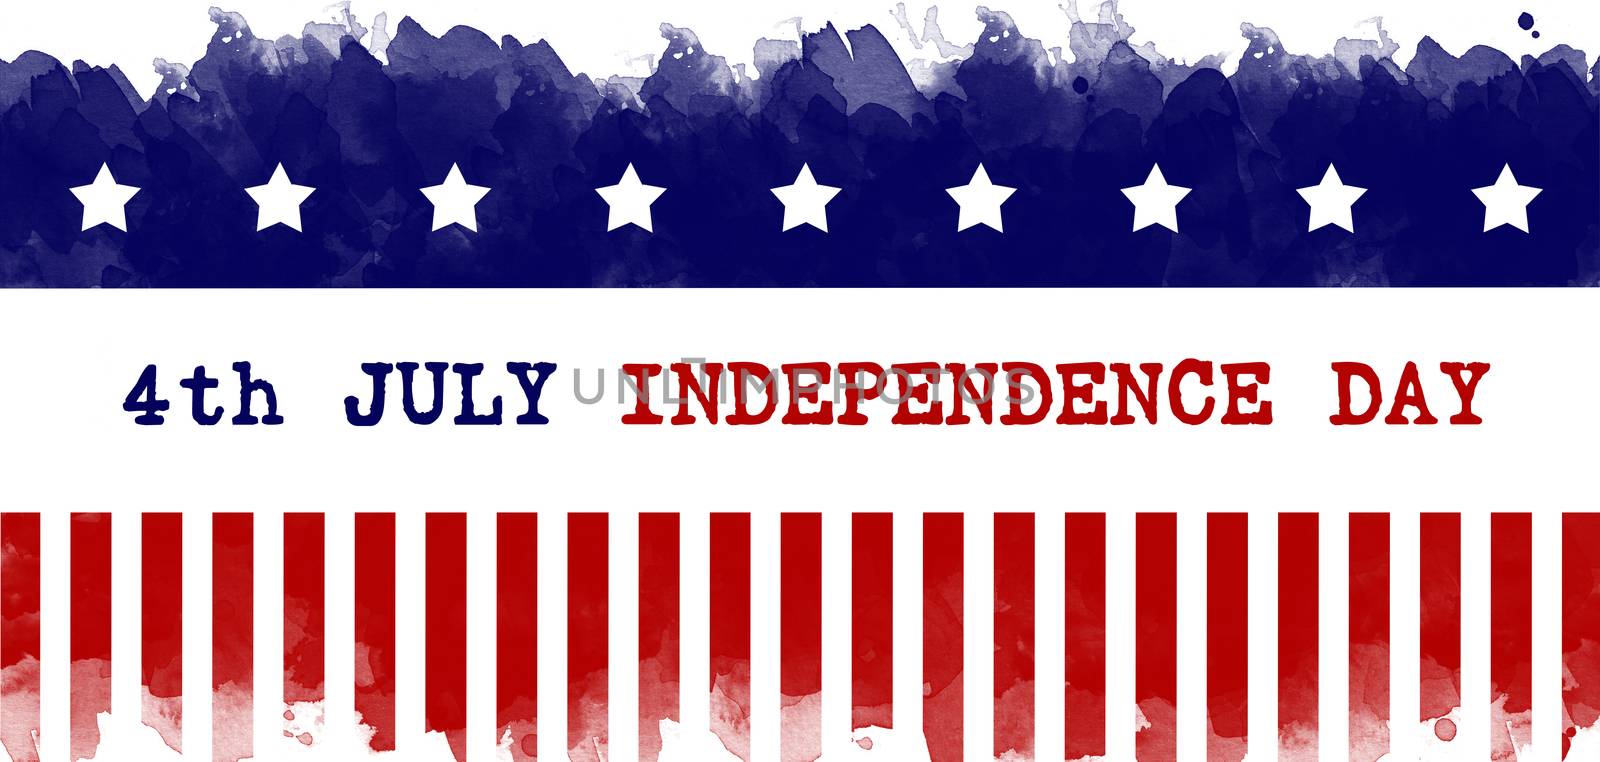 Independence Day greeting card american flag grunge background